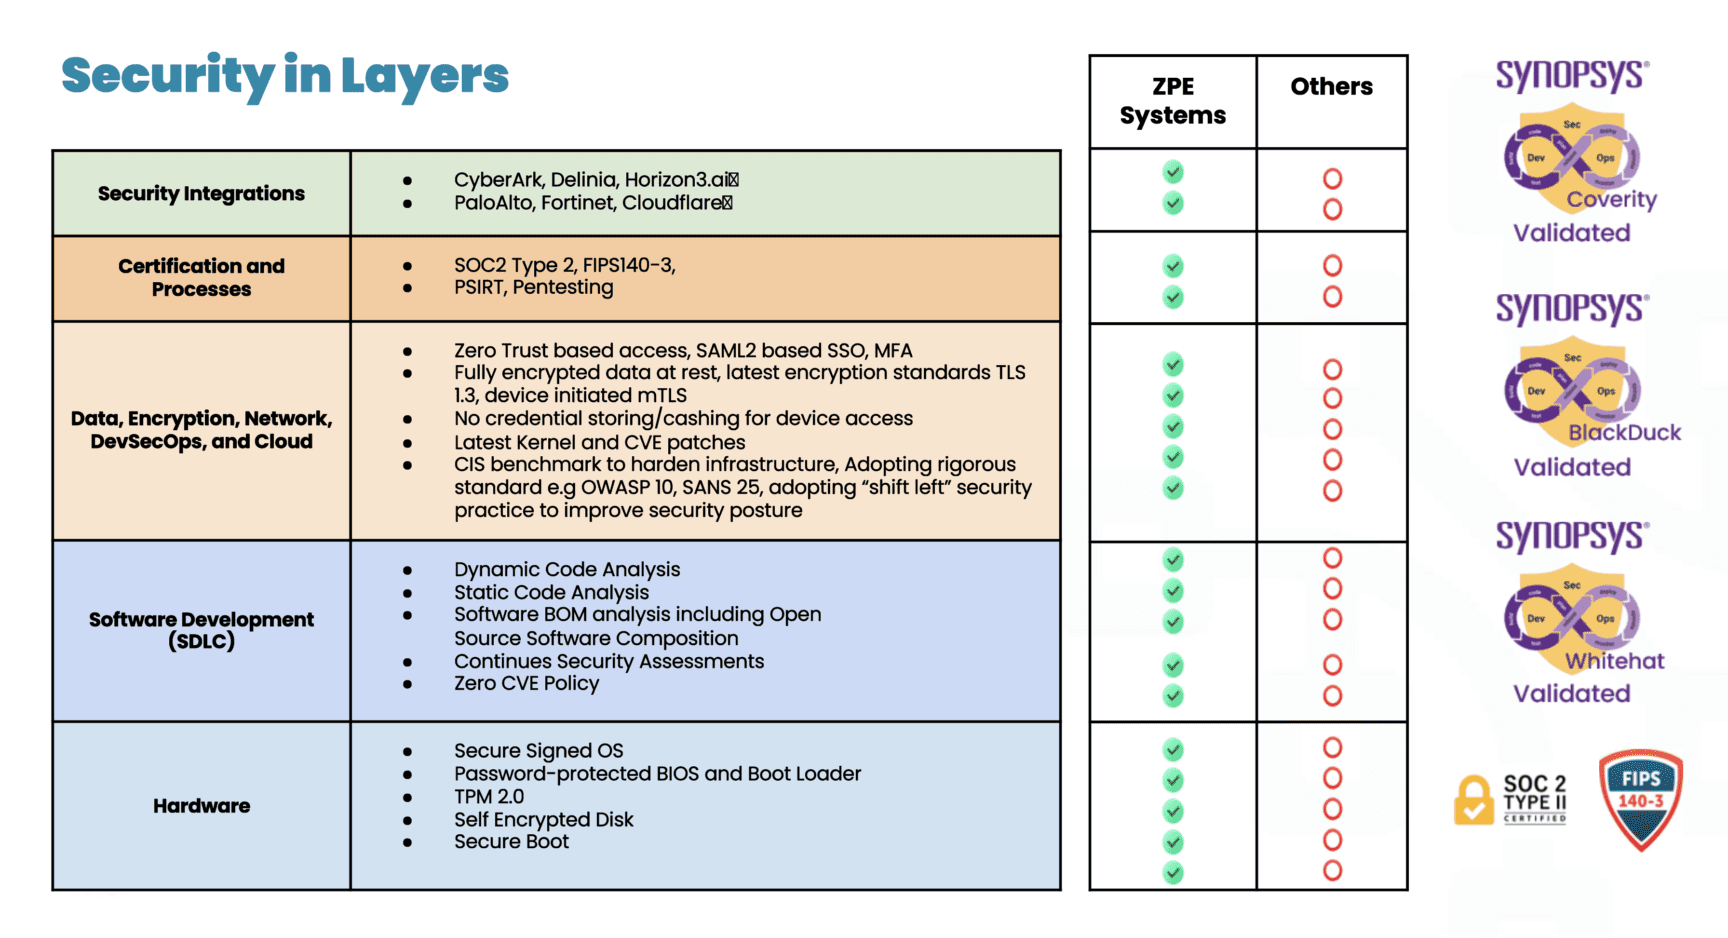 Table showing ZPE Systems' security in layers